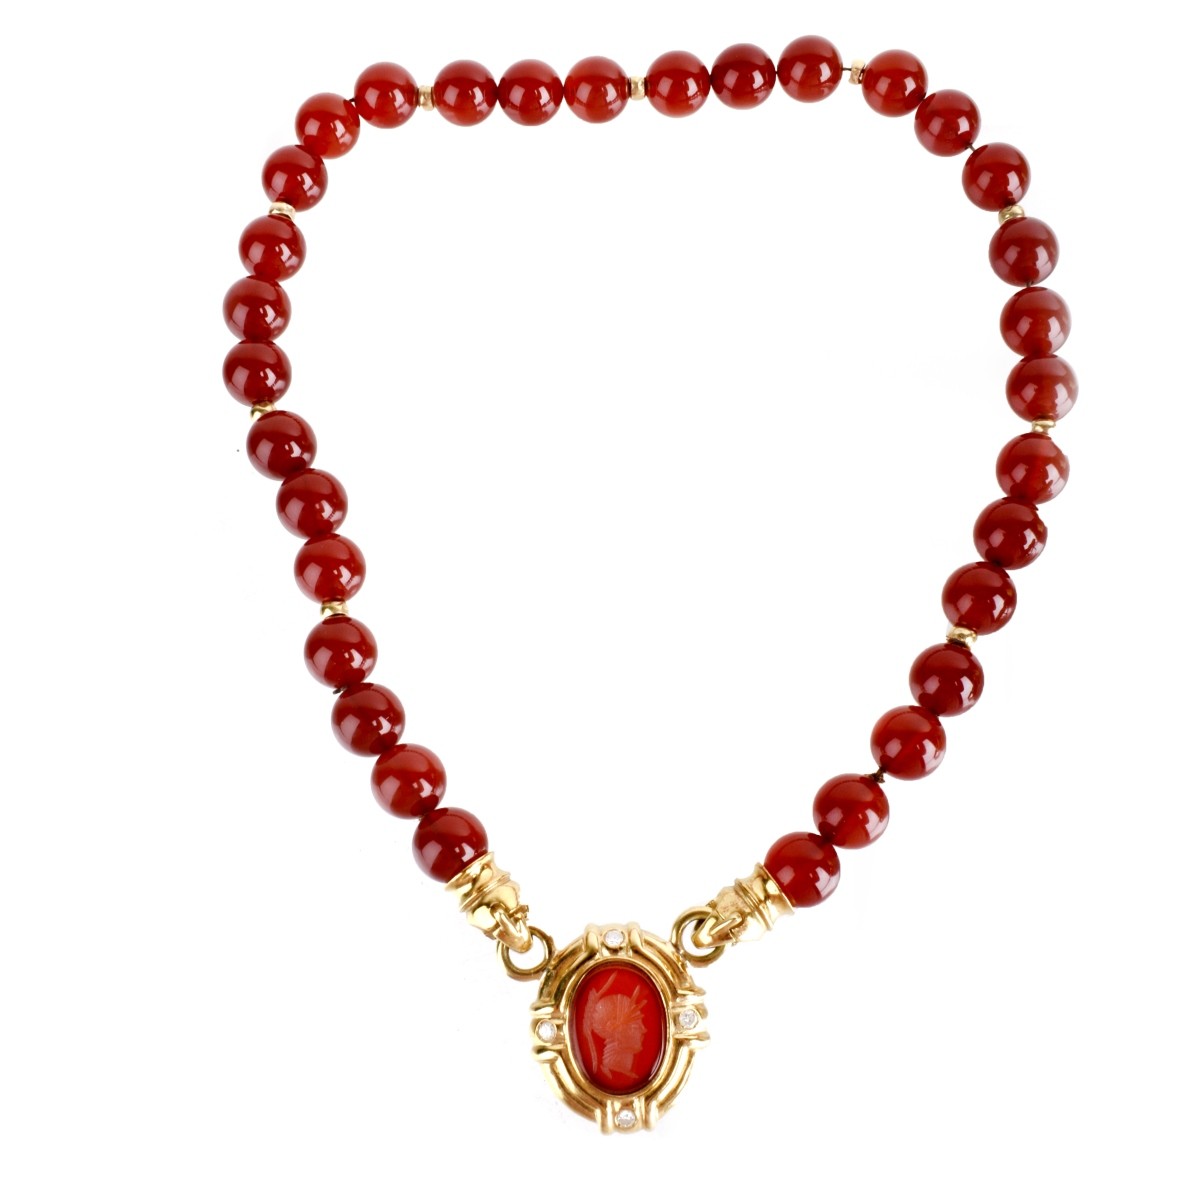 Carnelian and 18K Necklace and Earrings